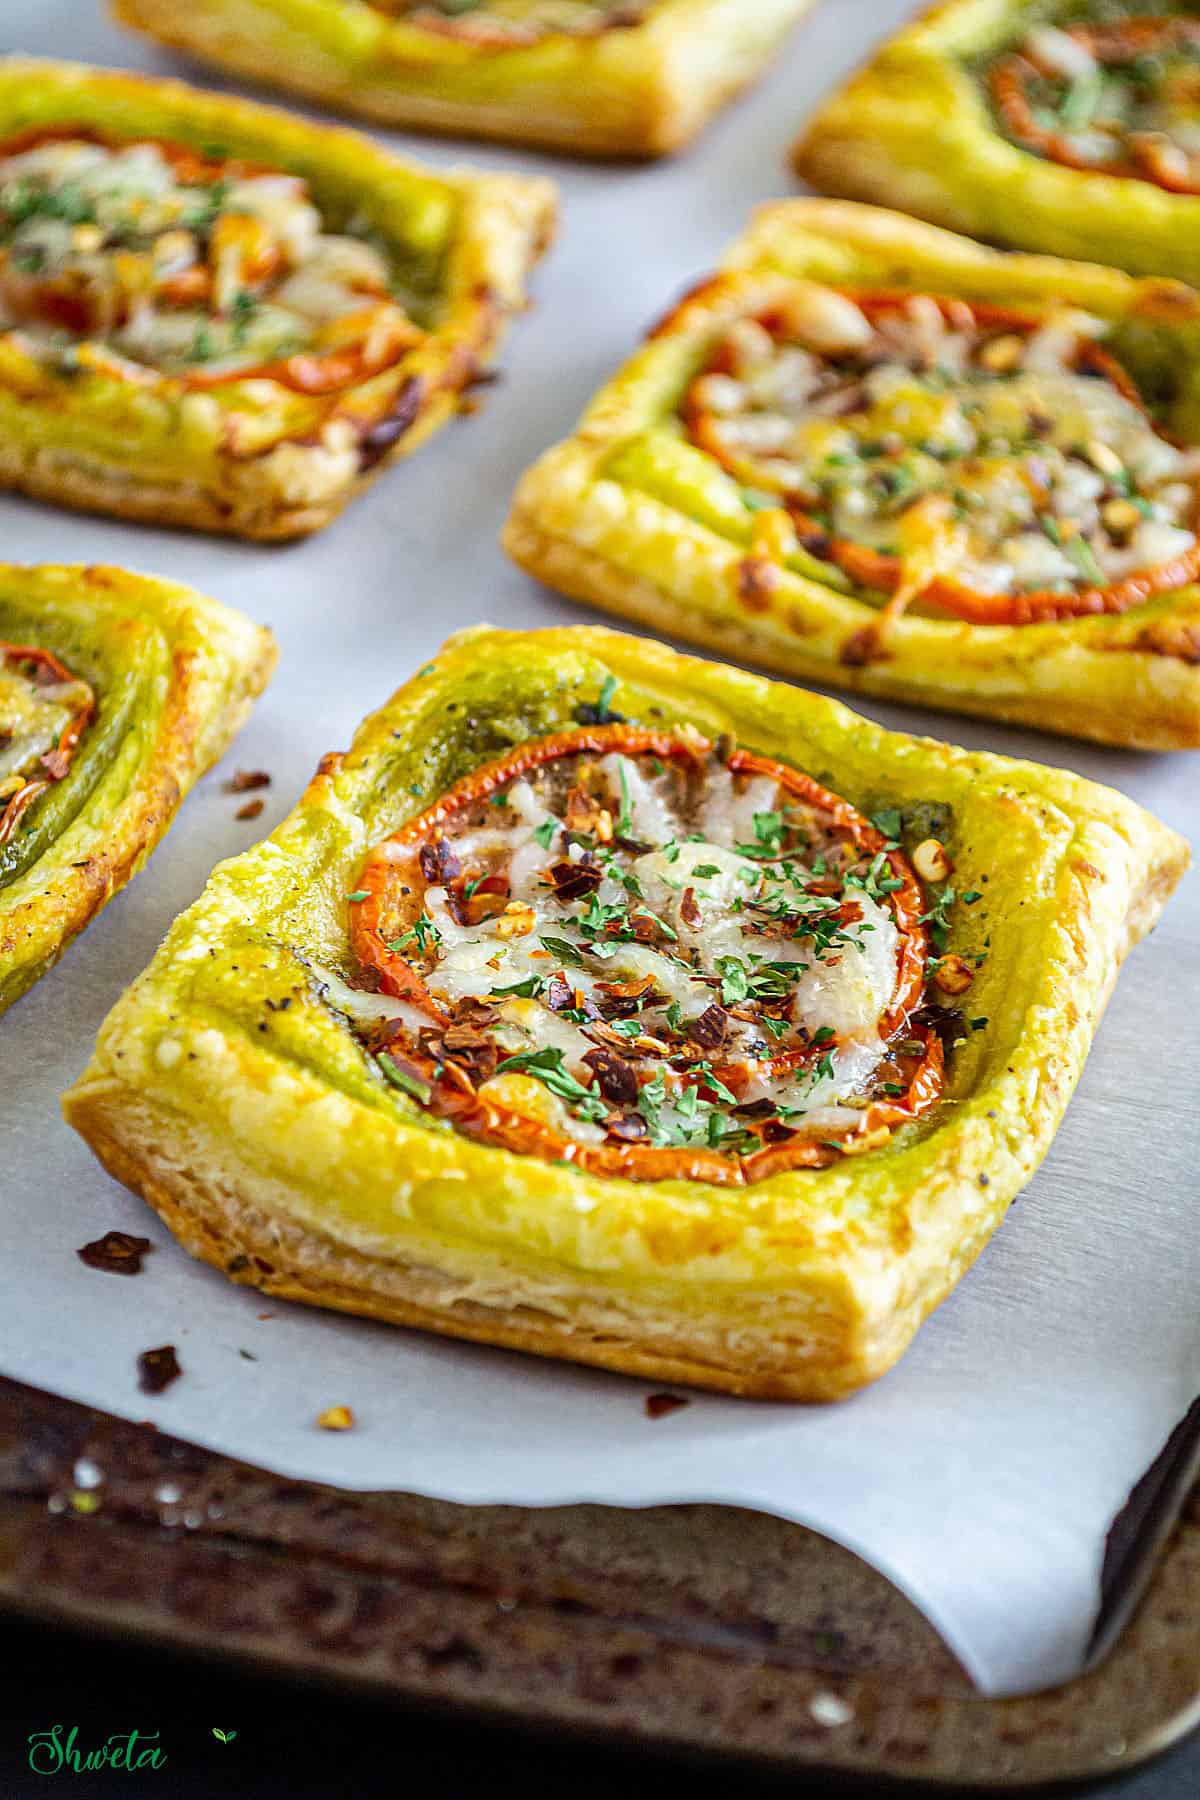 Tomato pesto tarts baked on a baking tray line with parchment